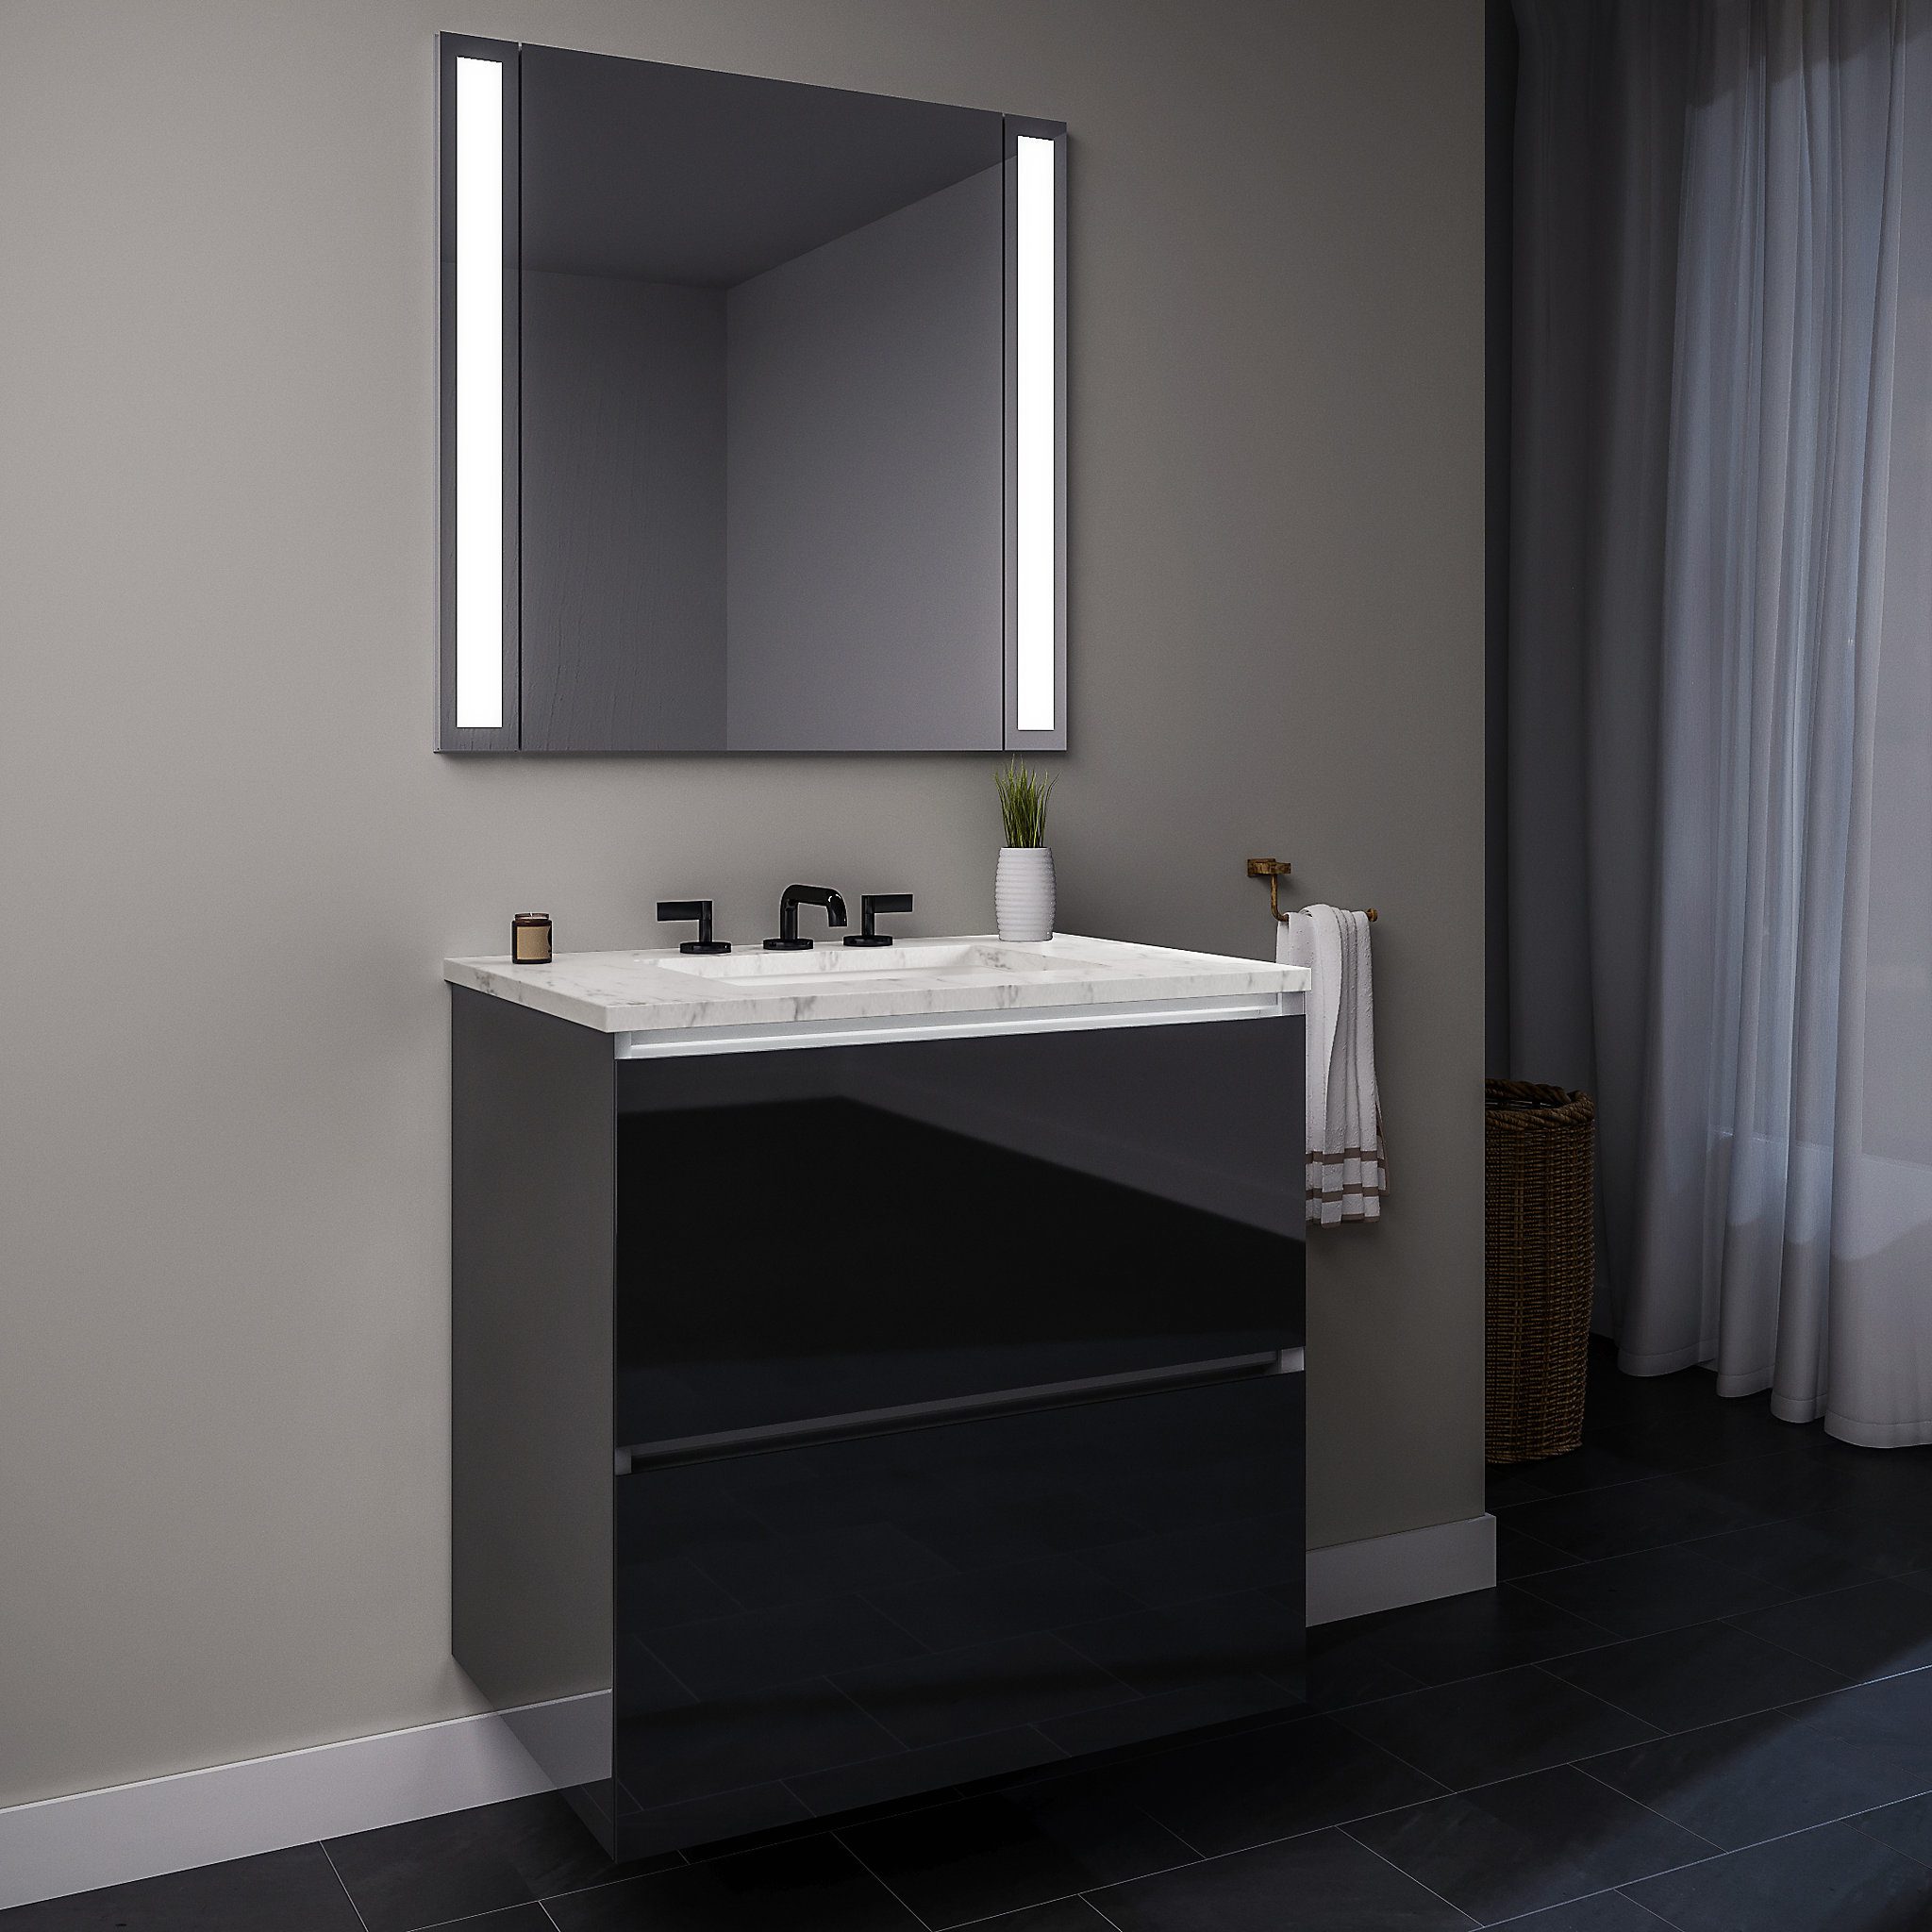 Robern 24119400TB00002 Curated Cartesian Vanity, 24" x 15" x 21", Two Drawer, Tinted Gray Mirror Glass, Plumbing Drawer, Full Dr